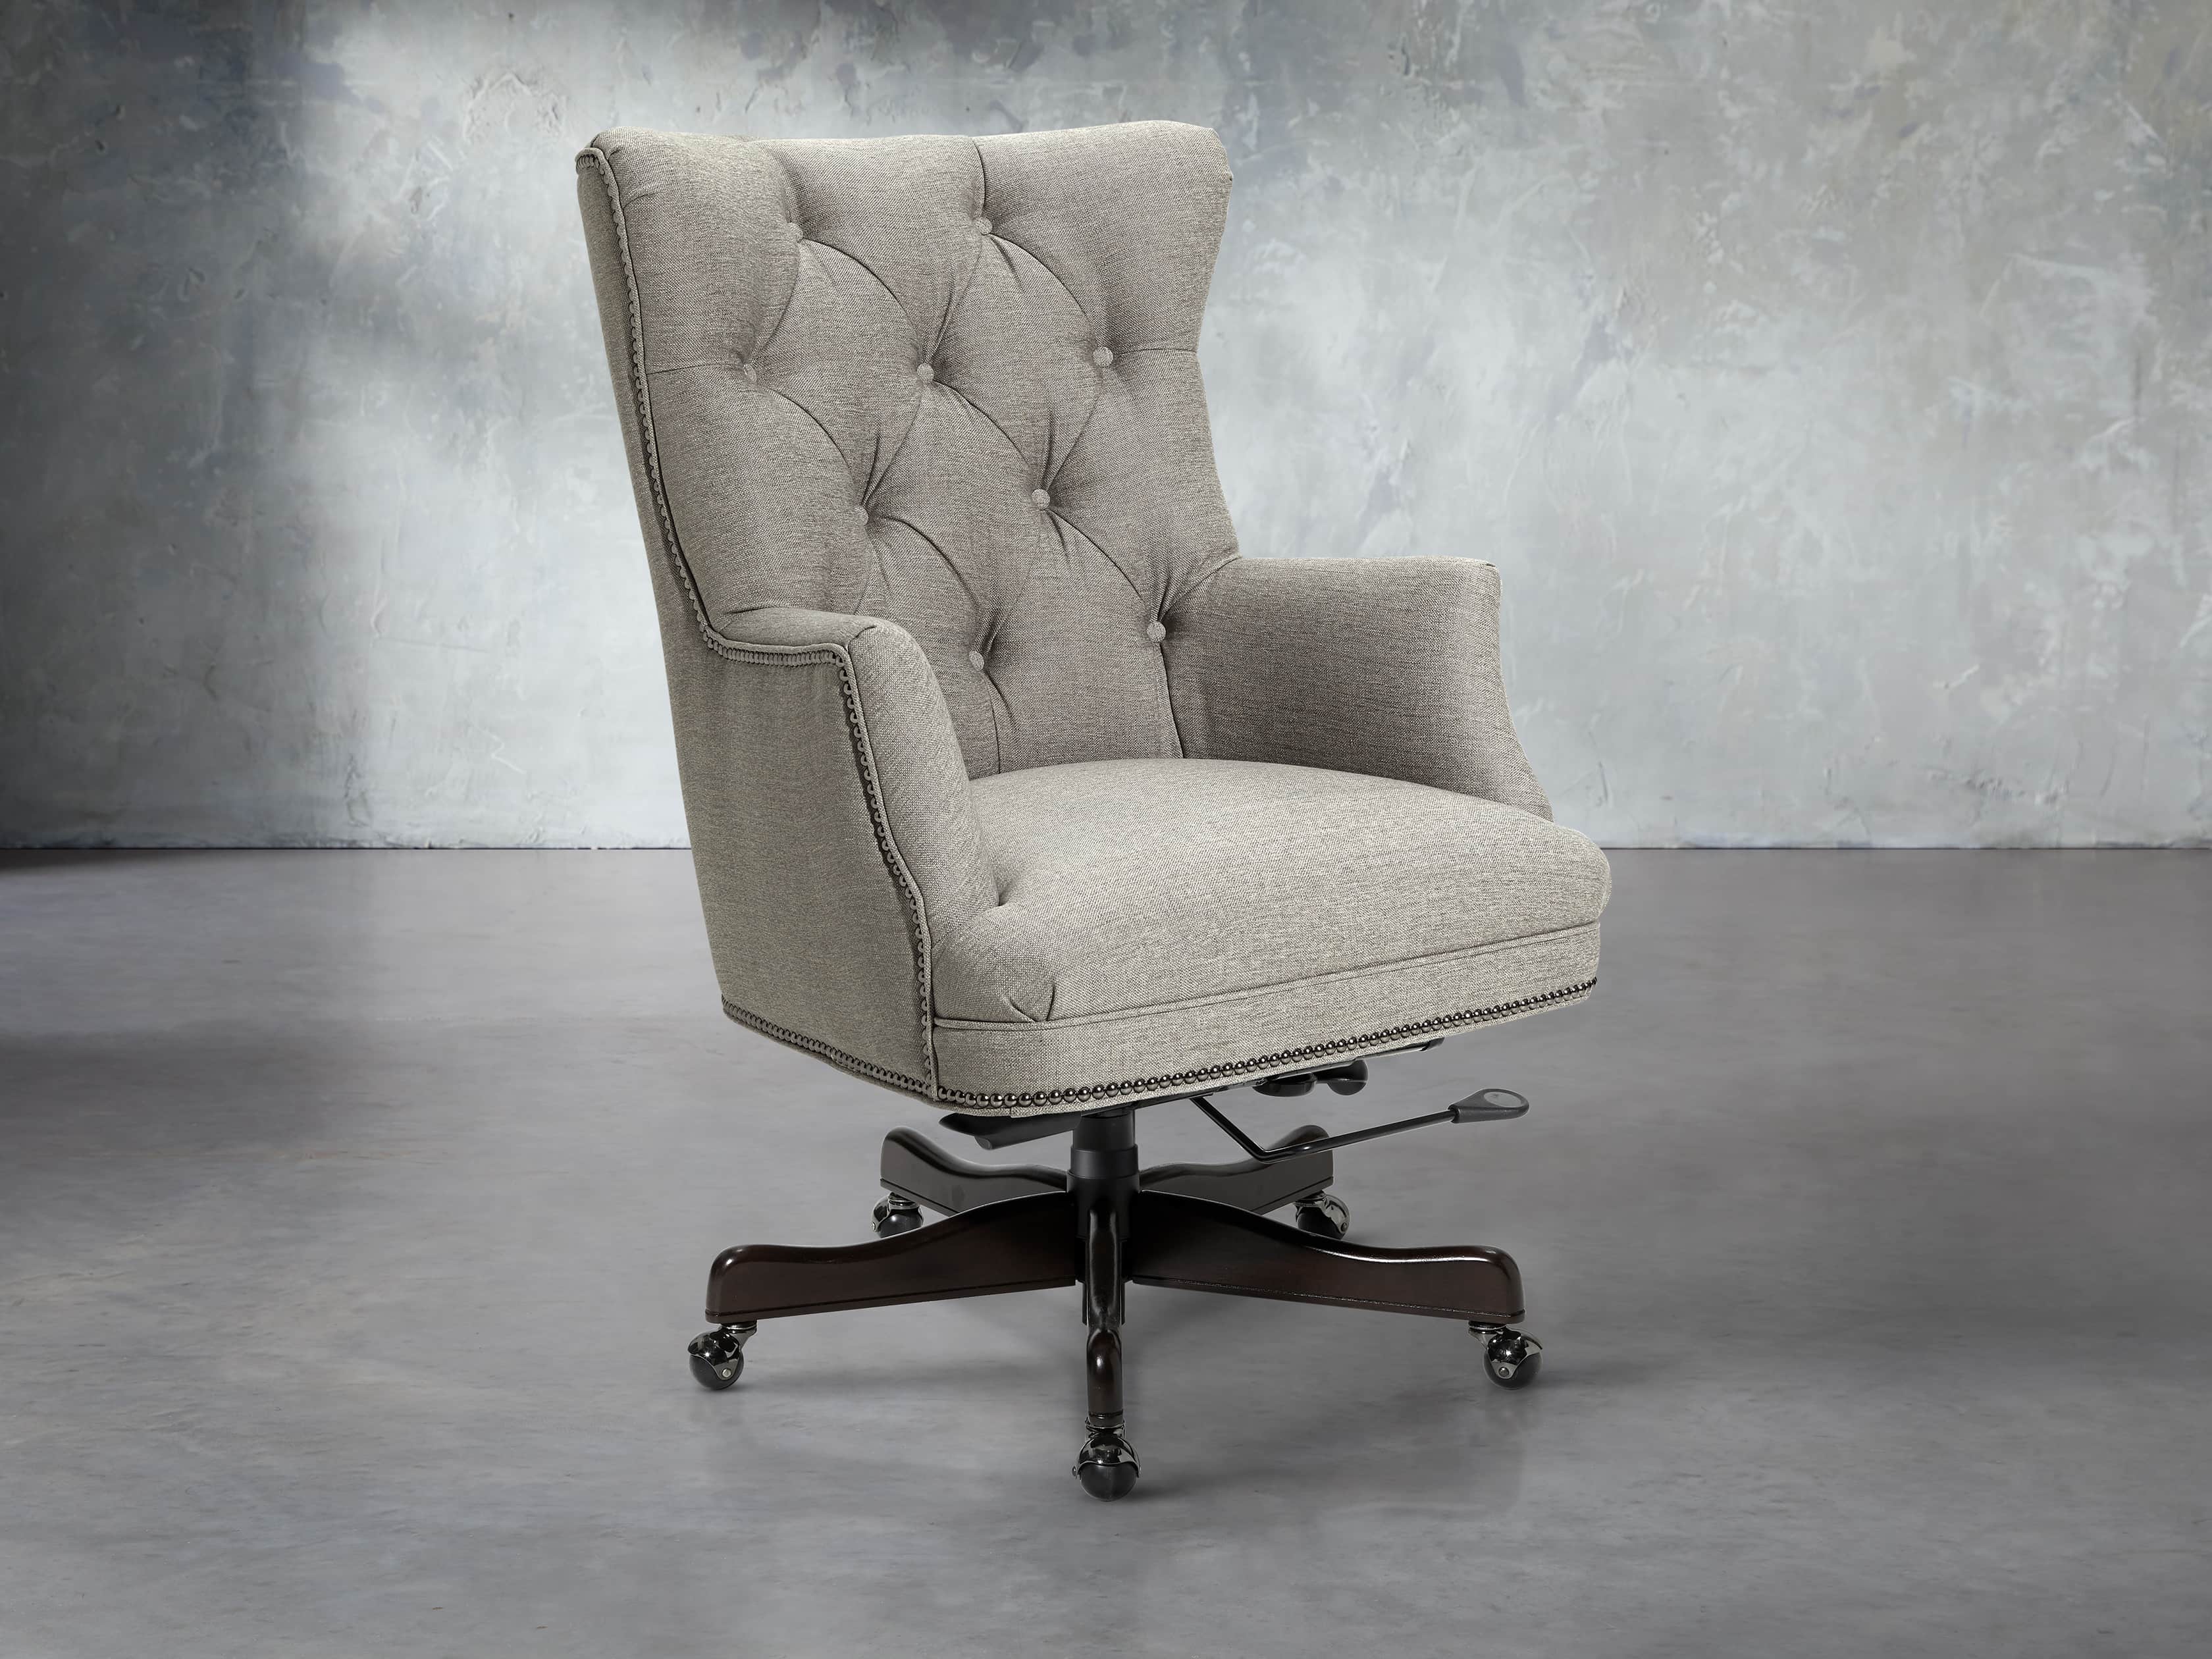 Addy Upholstered Tufted Desk Chair Arhaus